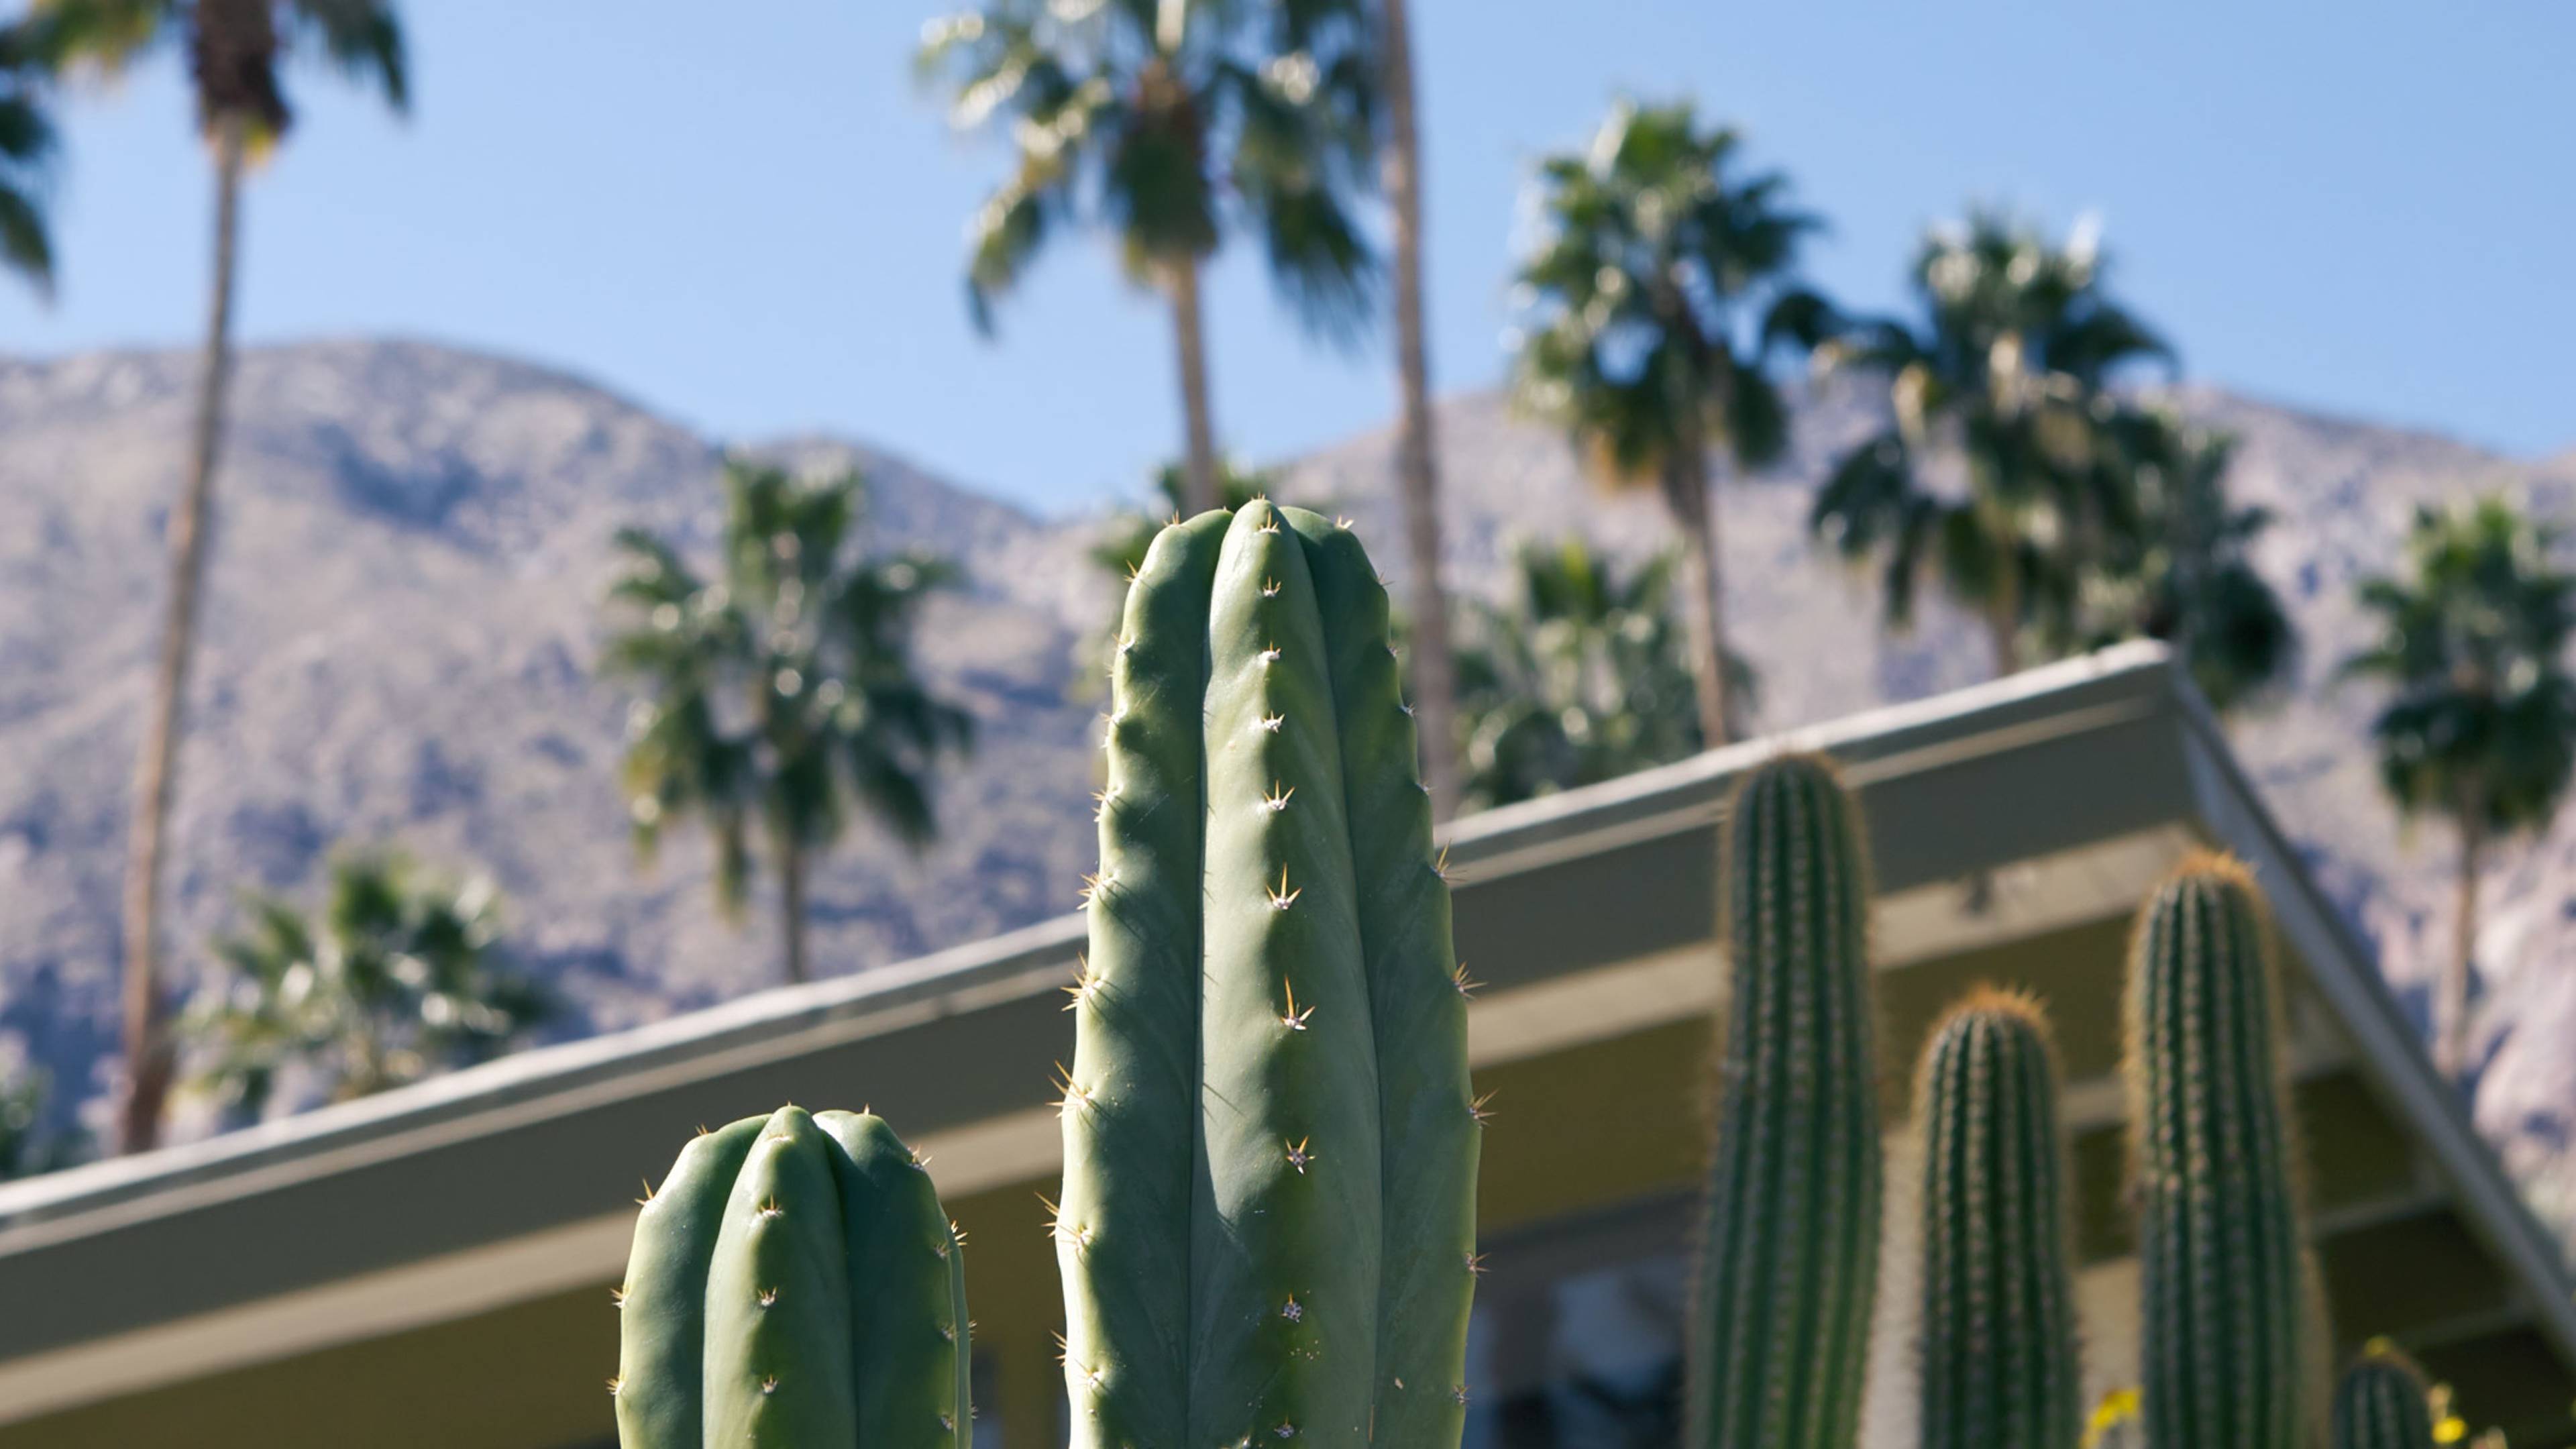 Palm springs home surround by cactus, palm trees